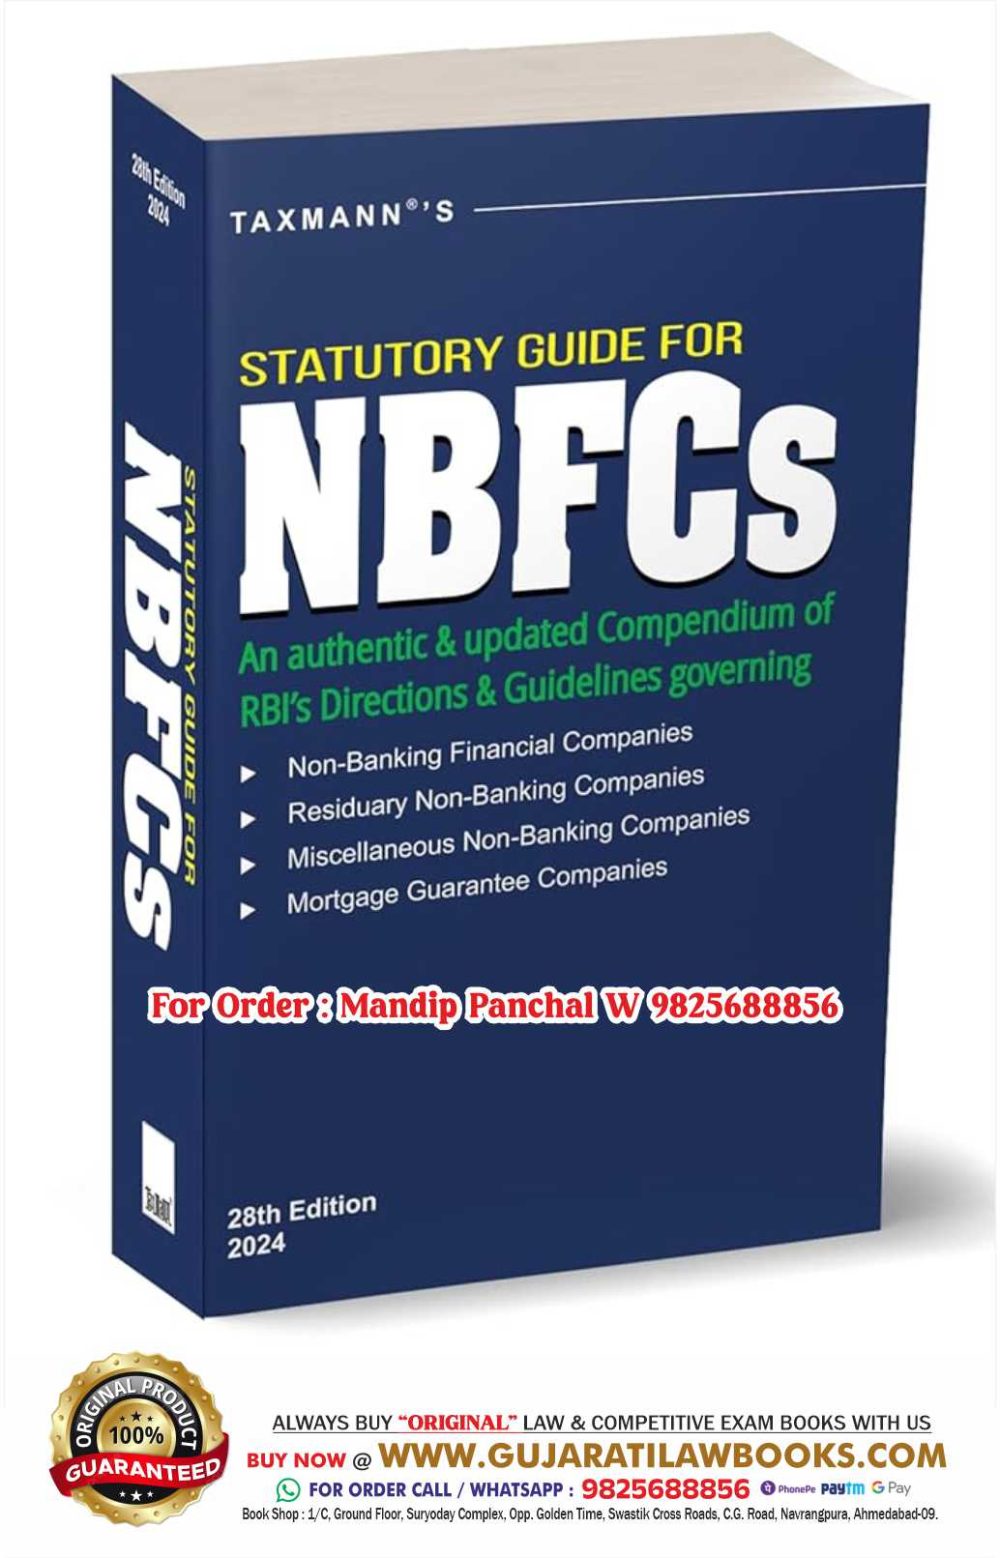 Taxmann's Statutory Guide for NBFCs – Authentic & Updated Compendium of RBI's Directions & Guidelines Governing NBFCs | Residuary NBFCs | Miscellaneous Non-Banking Companies, etc. - Latest March 2024 Edition